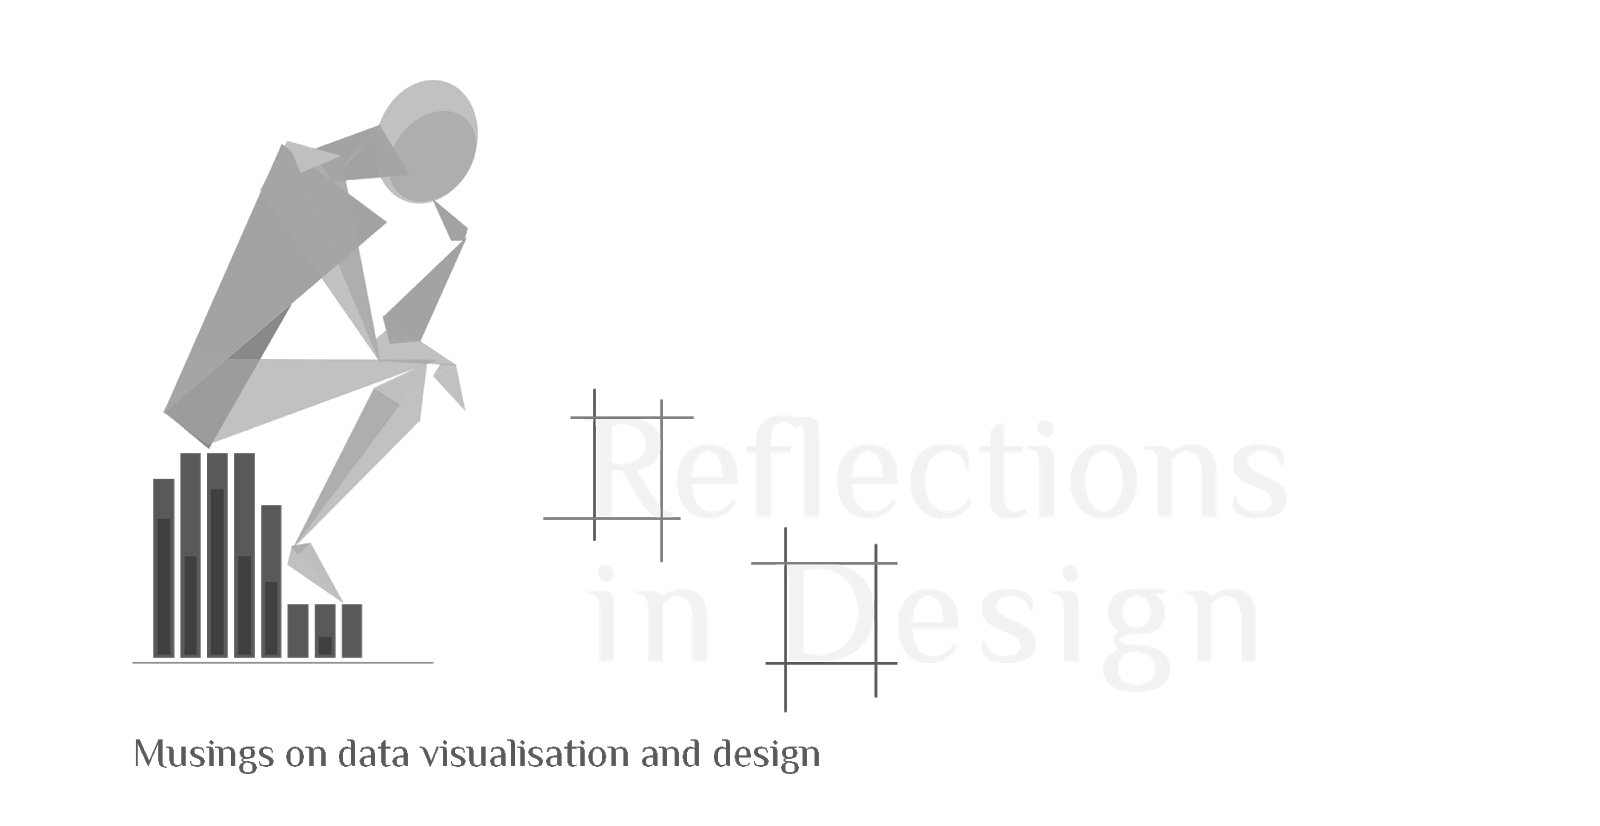 Reflections in Design